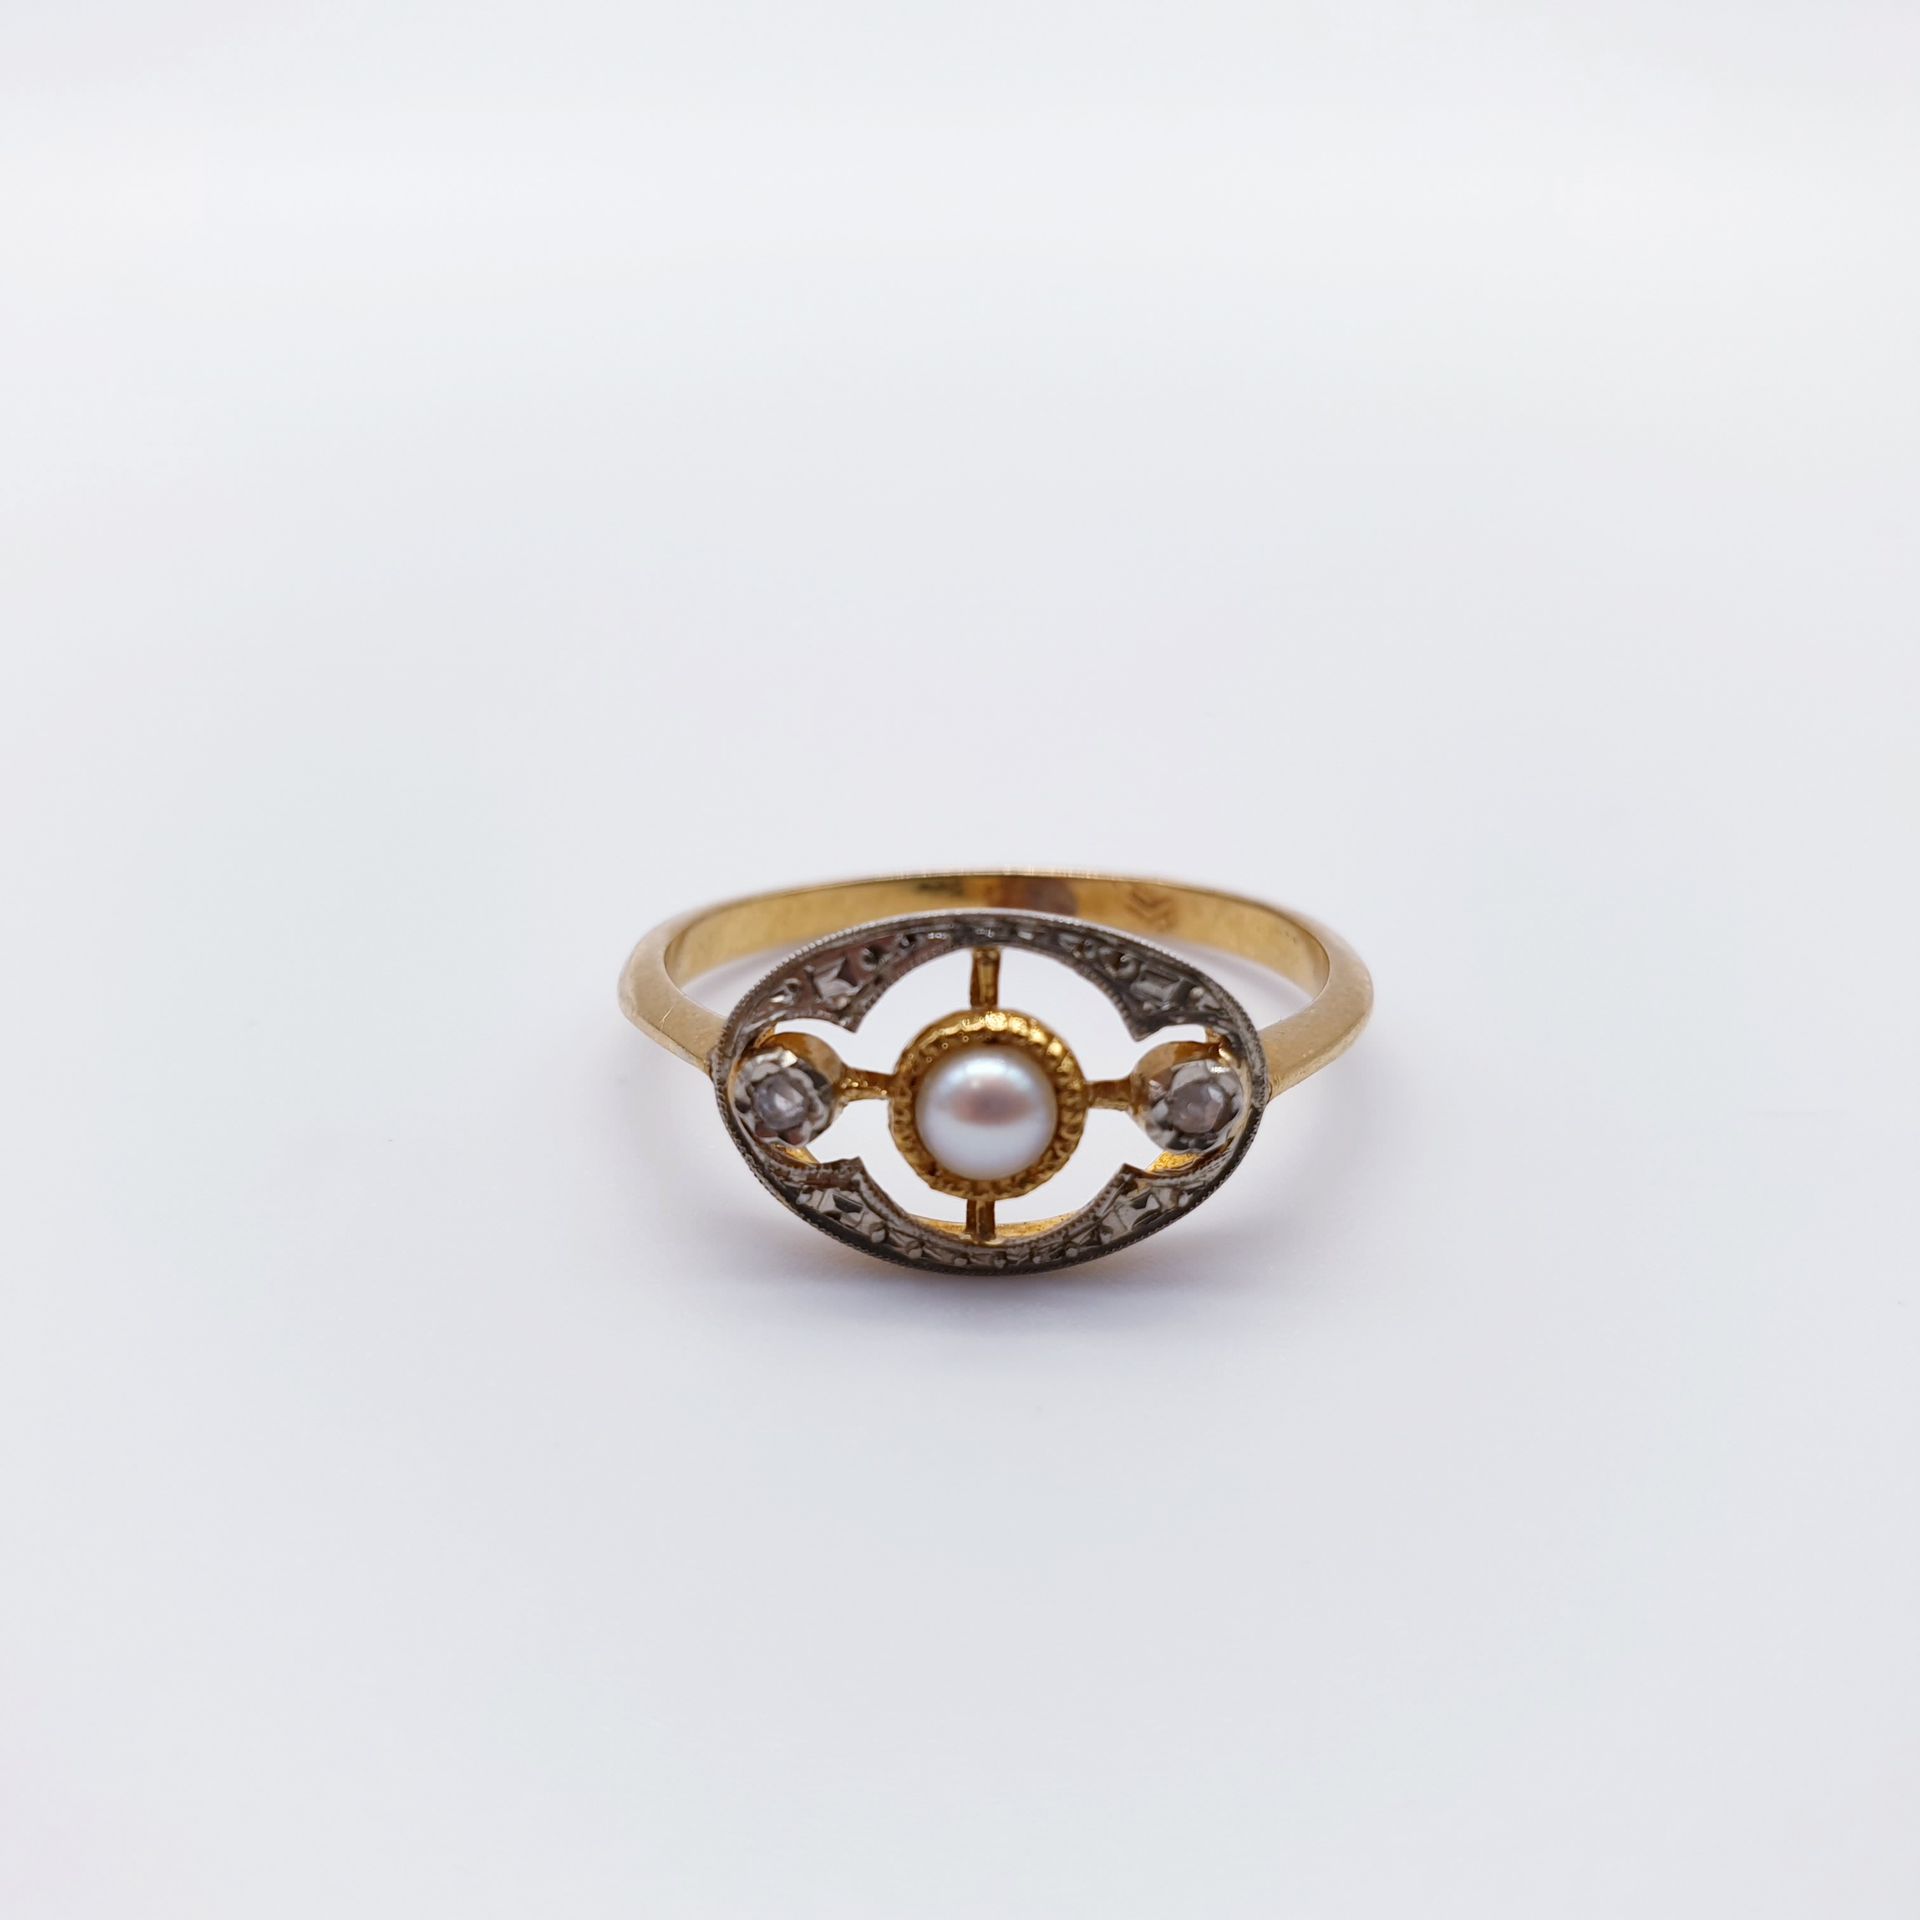 Null RING in two-tone gold 750° decorated with a pearl and two roses

Gross weig&hellip;